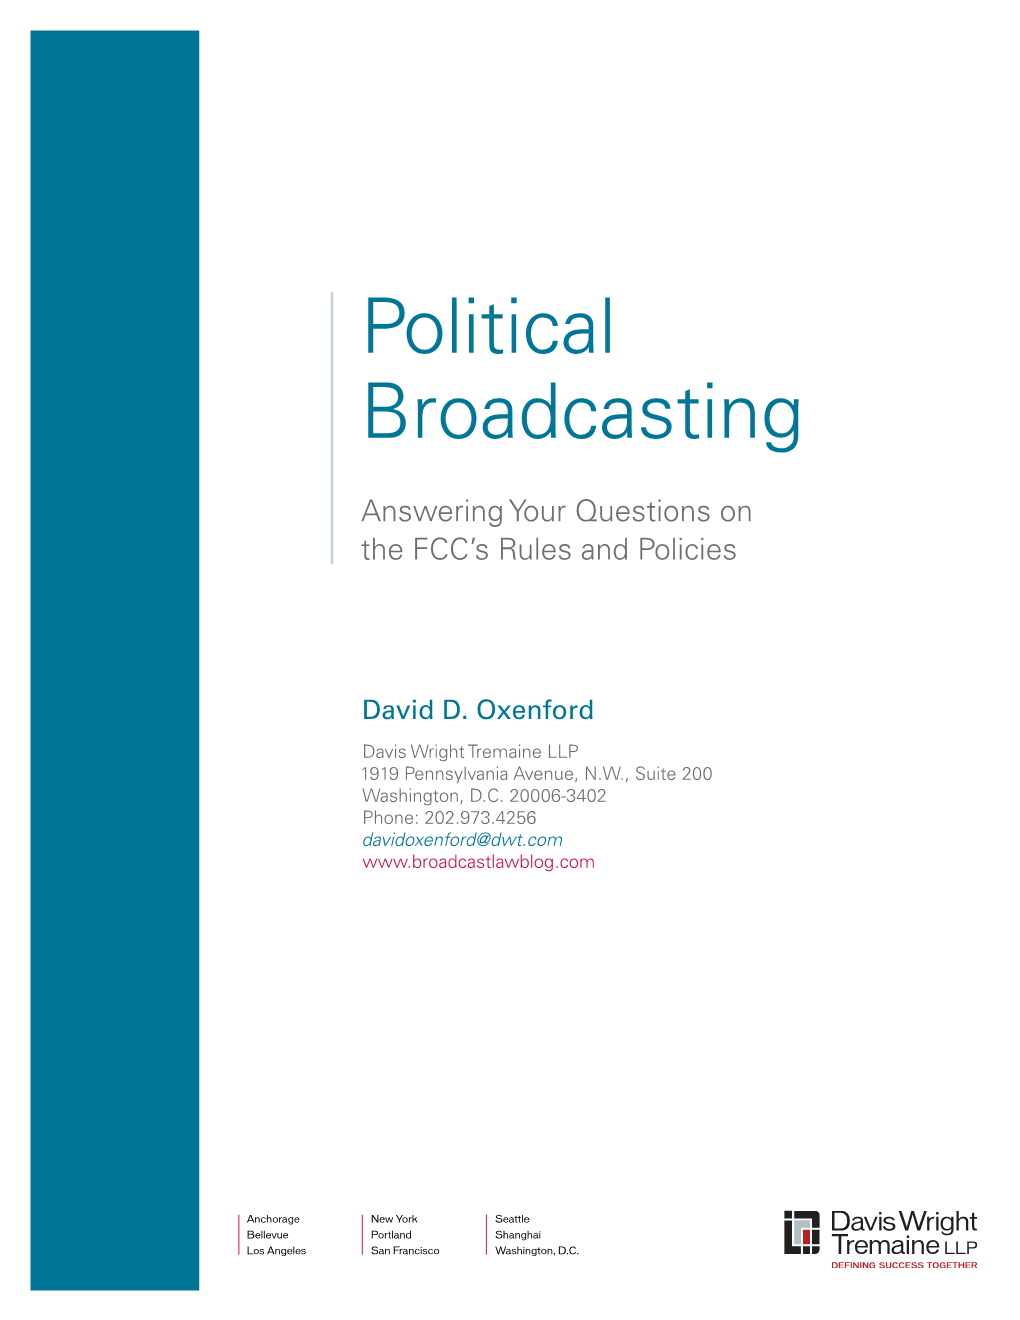 Political Broadcasting Guides As Just That—A Guide to Help You Spot These Issues